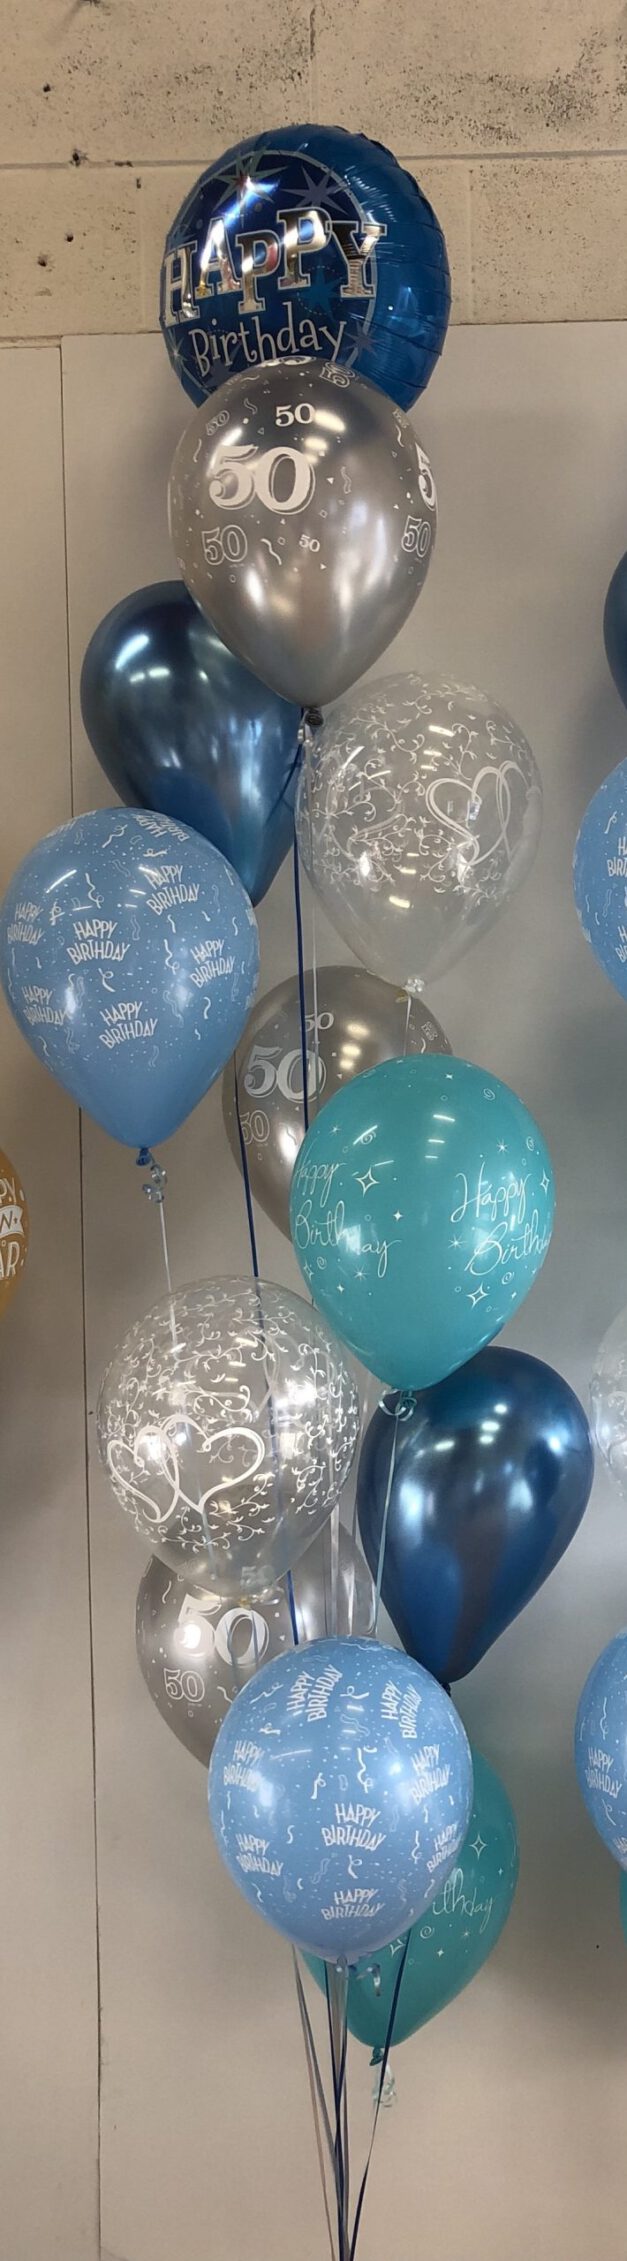 Blue and silver balloons in groups of 12